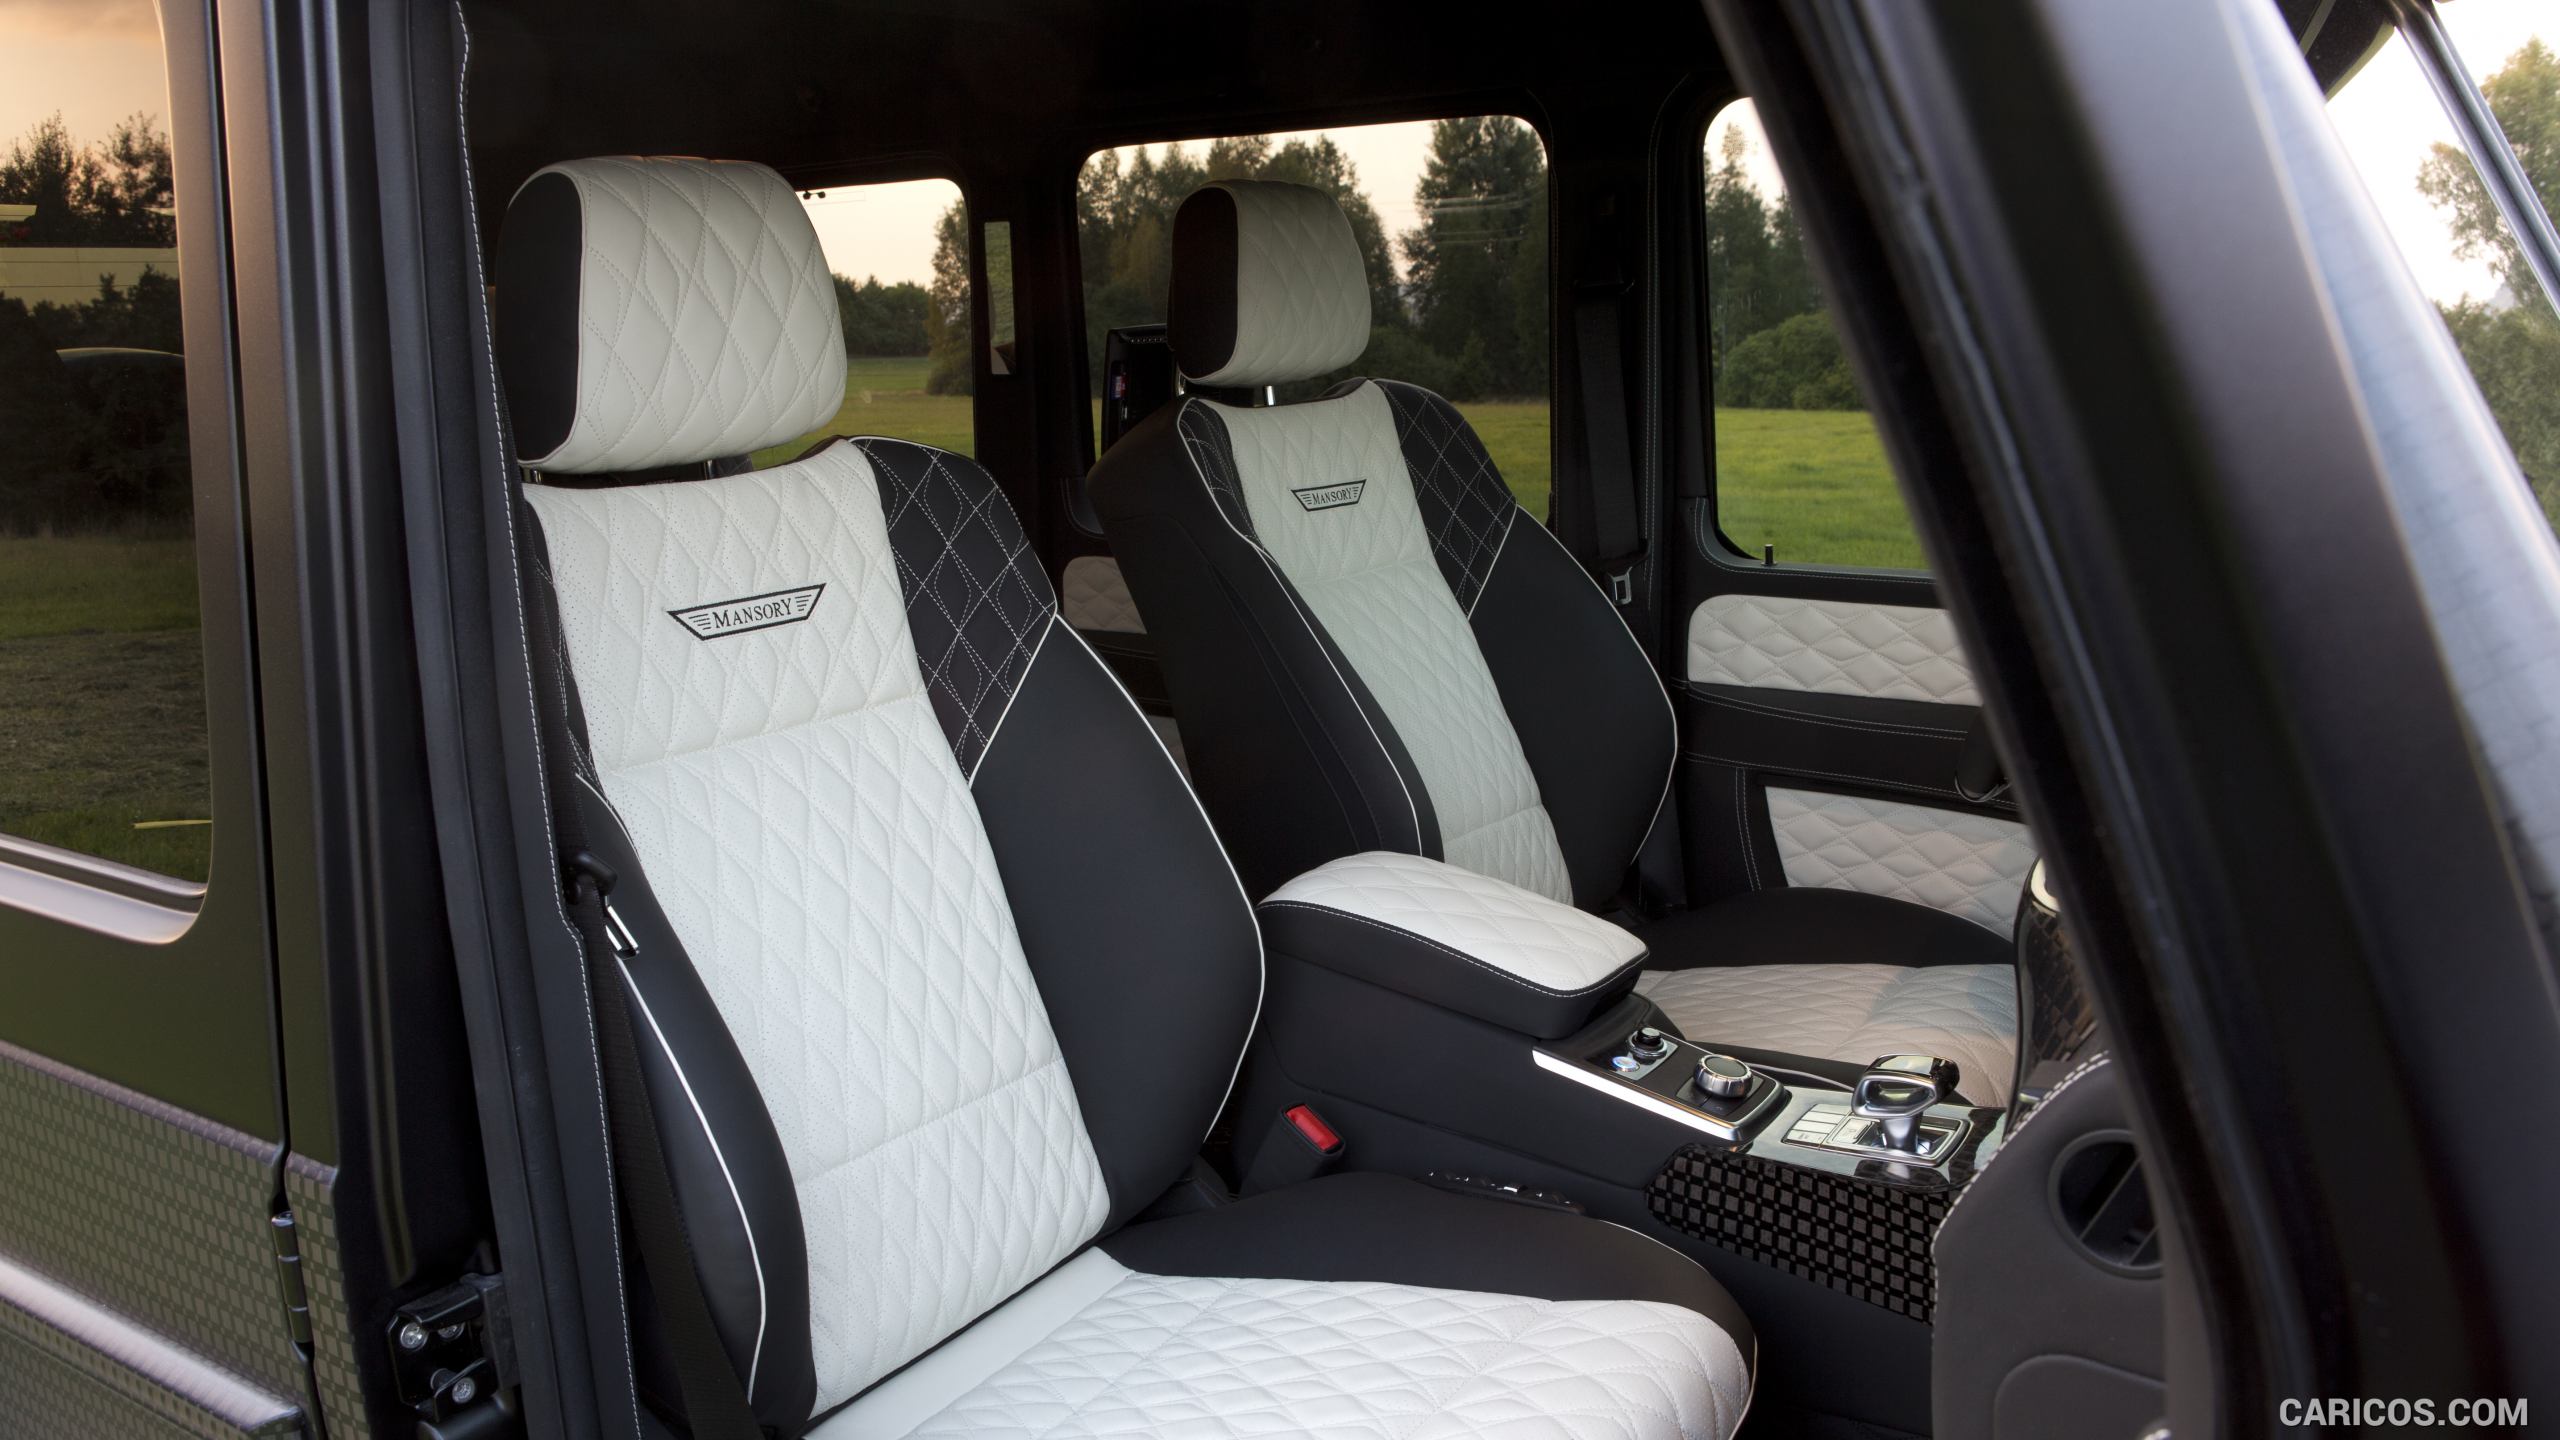 2016 MANSORY GRONOS Black Edition based on Mercedes G63 AMG - Interior Front Seats, #14 of 16